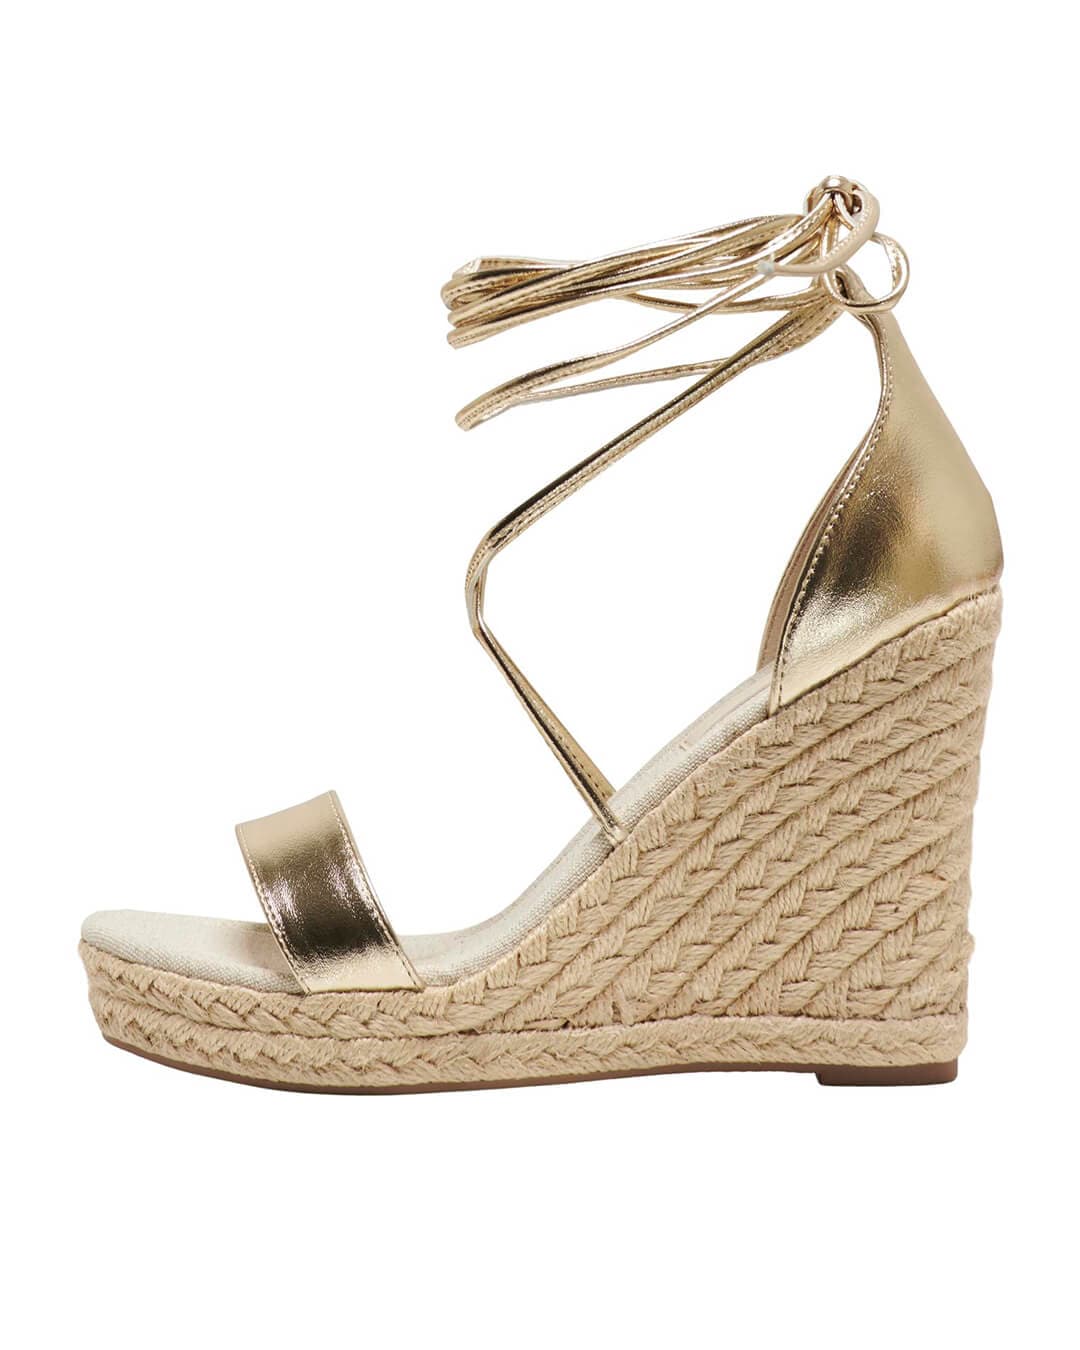 Only Shoes Only Gold Amelia Foil Wrap Wedges